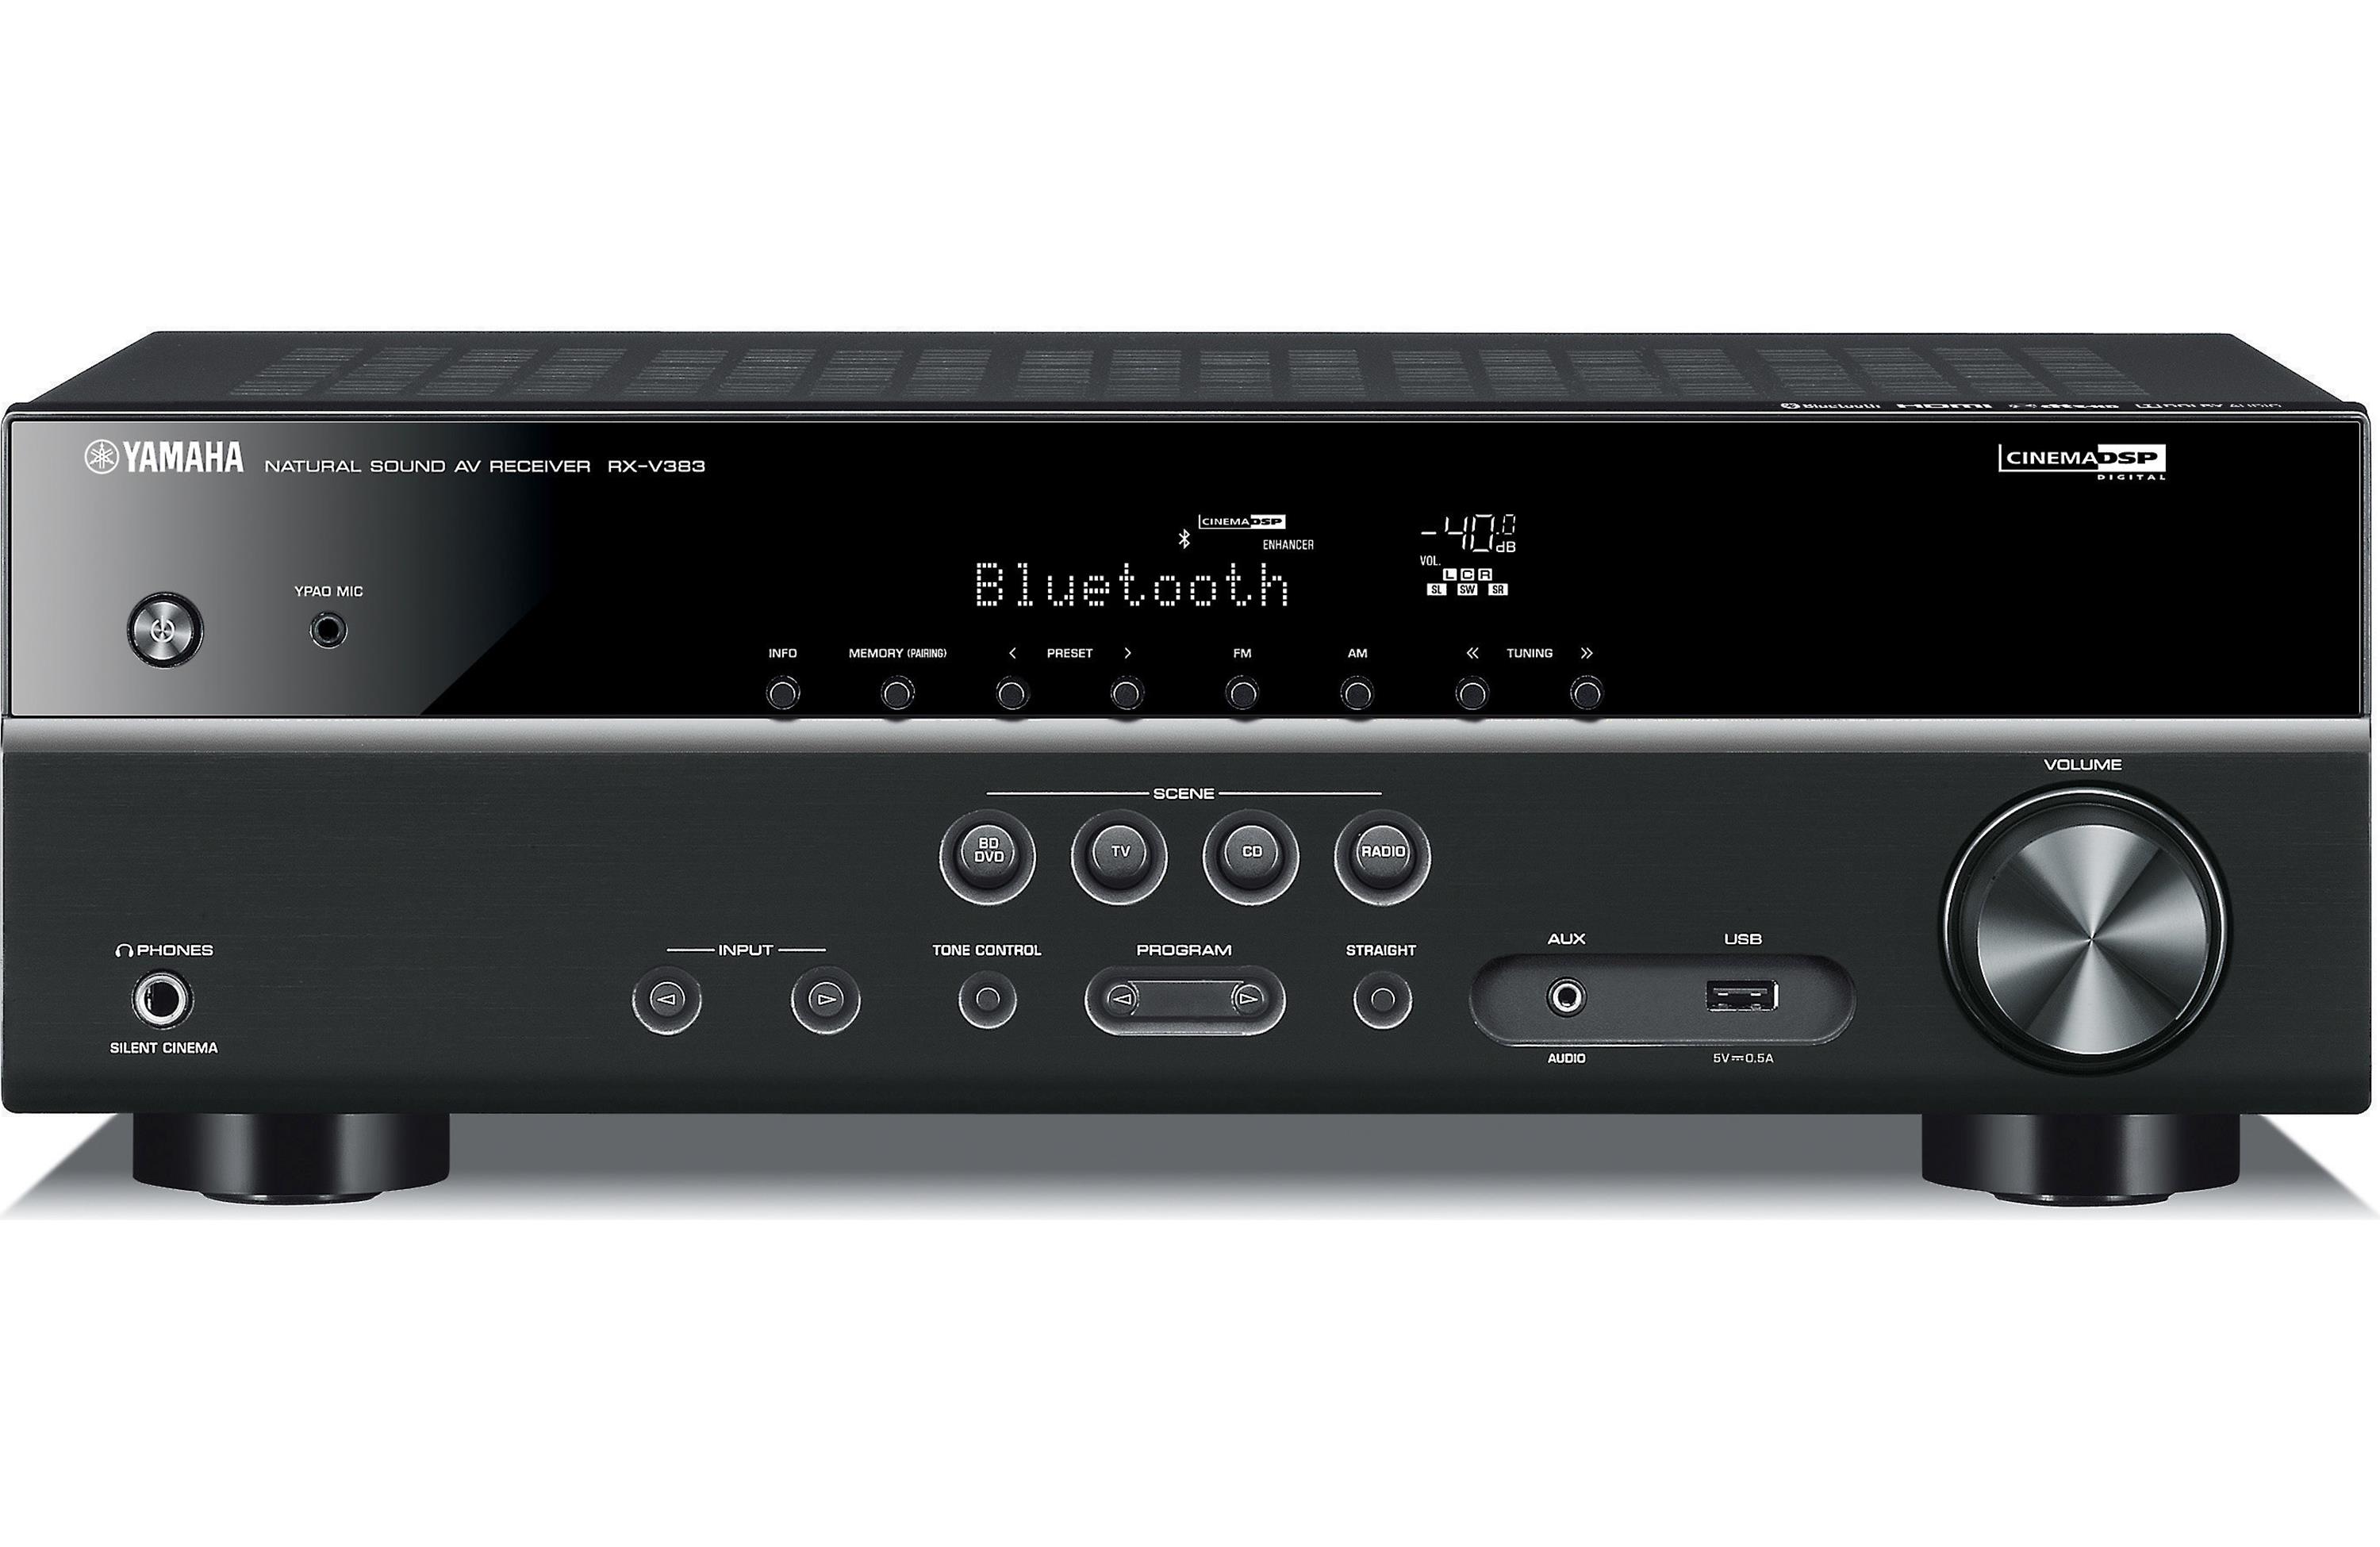 Electronics Expo: Yamaha RX-V383 5.1-channel home theater receiver with